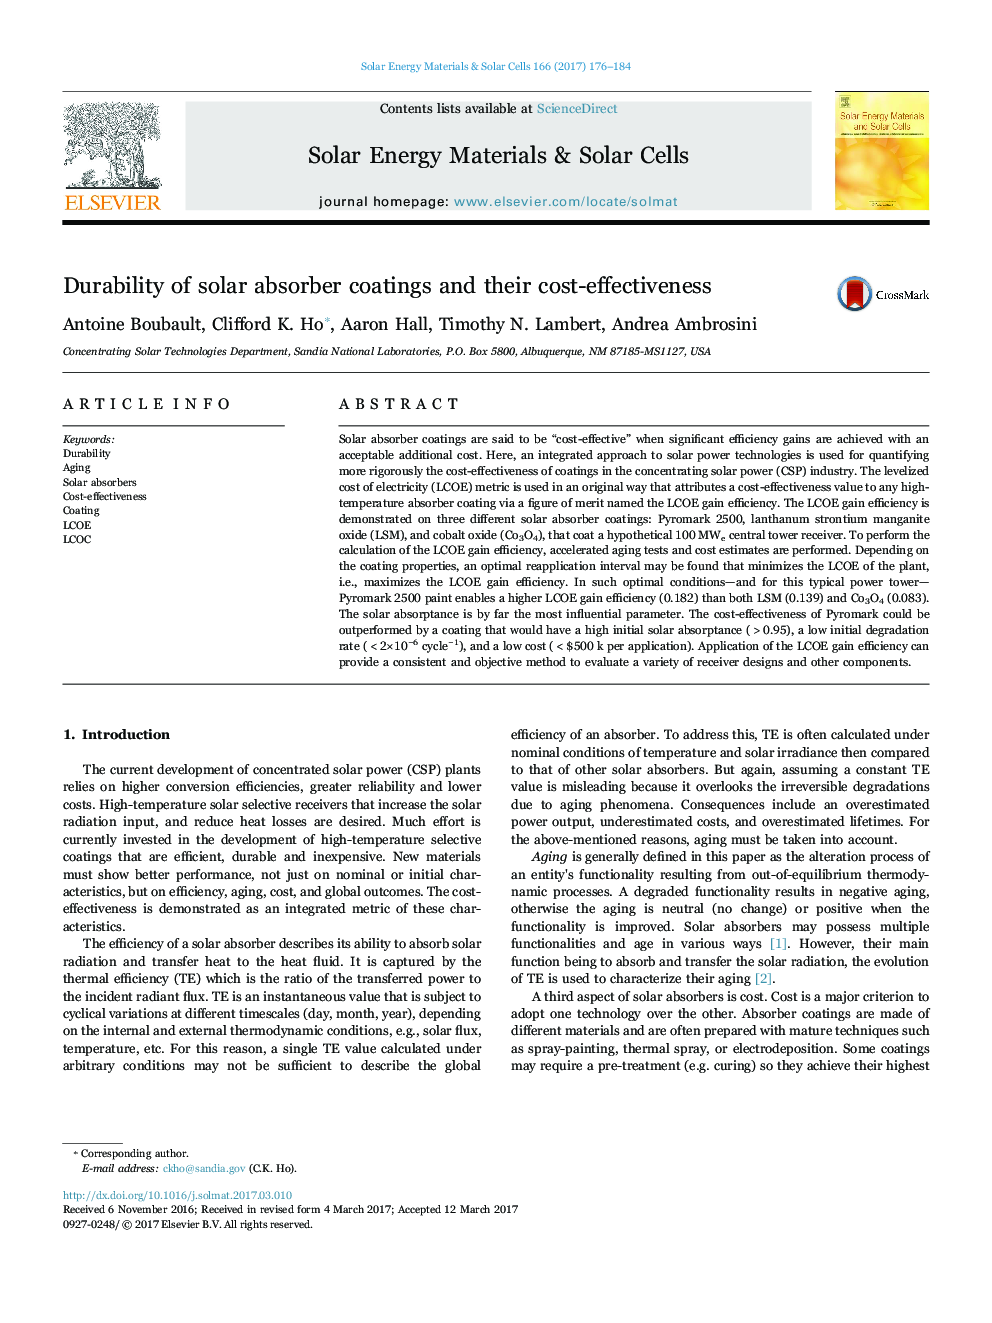 Durability of solar absorber coatings and their cost-effectiveness